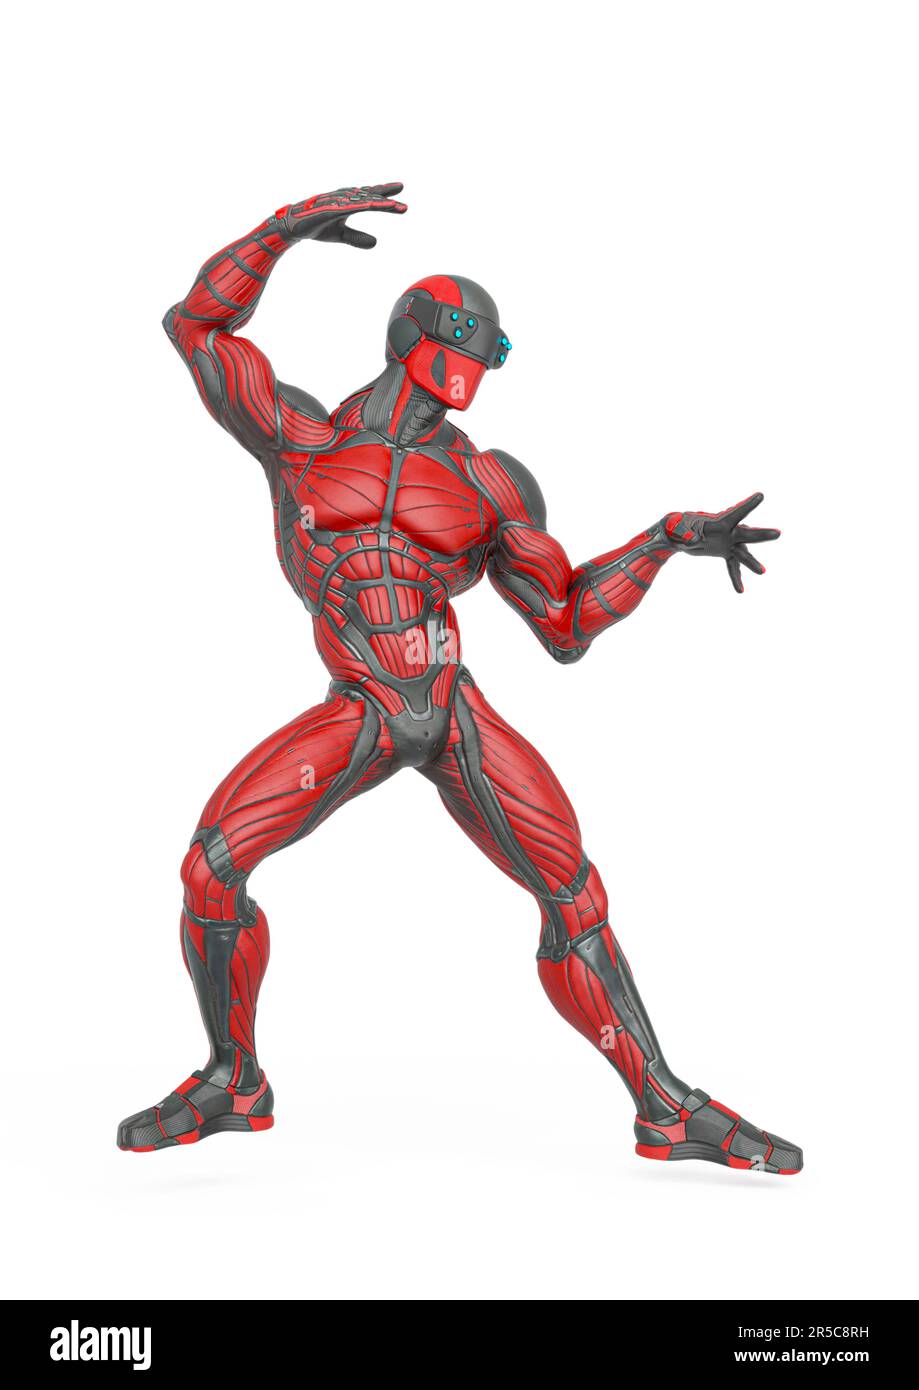 super hero is doing a dynamic fight pose in an exosuit, 3d illustration Stock Photo